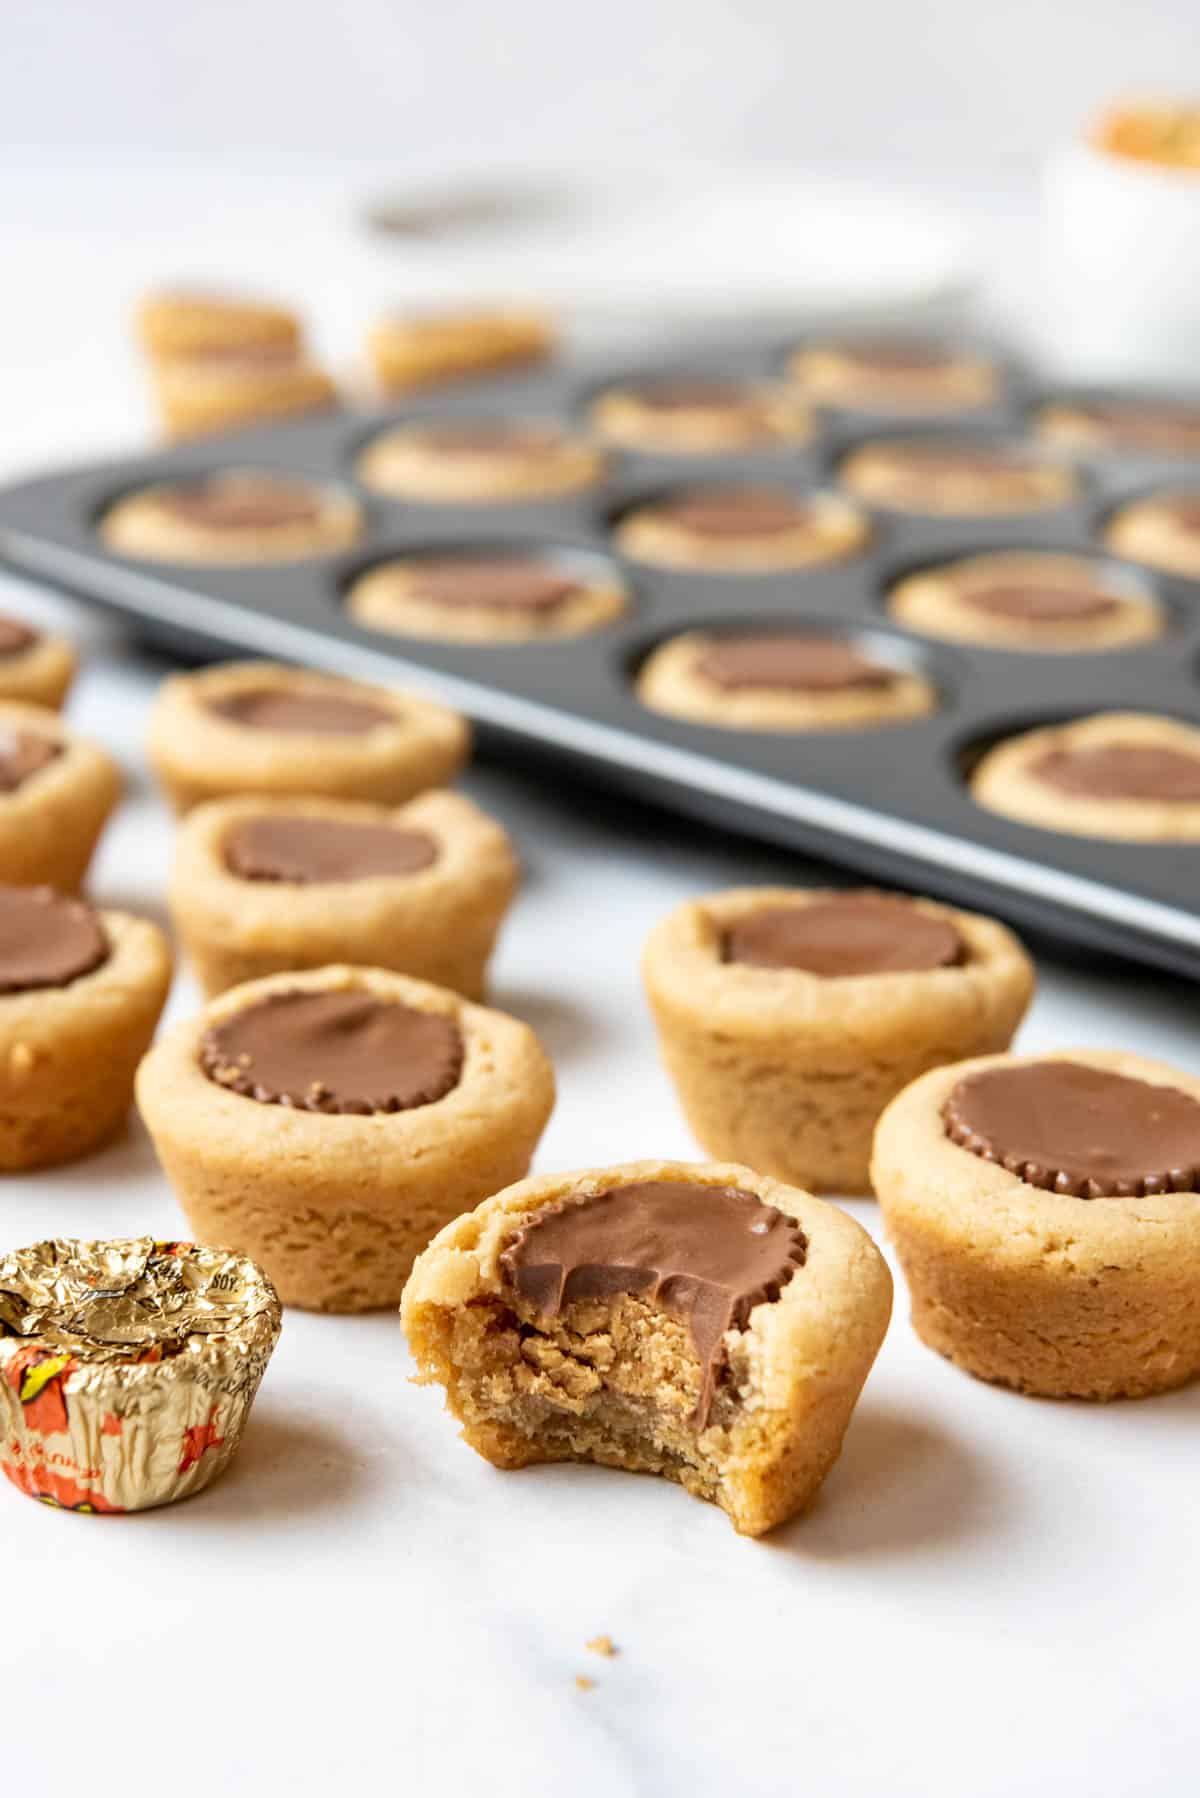 Soft peanut butter cup cookies with a bite taken out of the one in front.